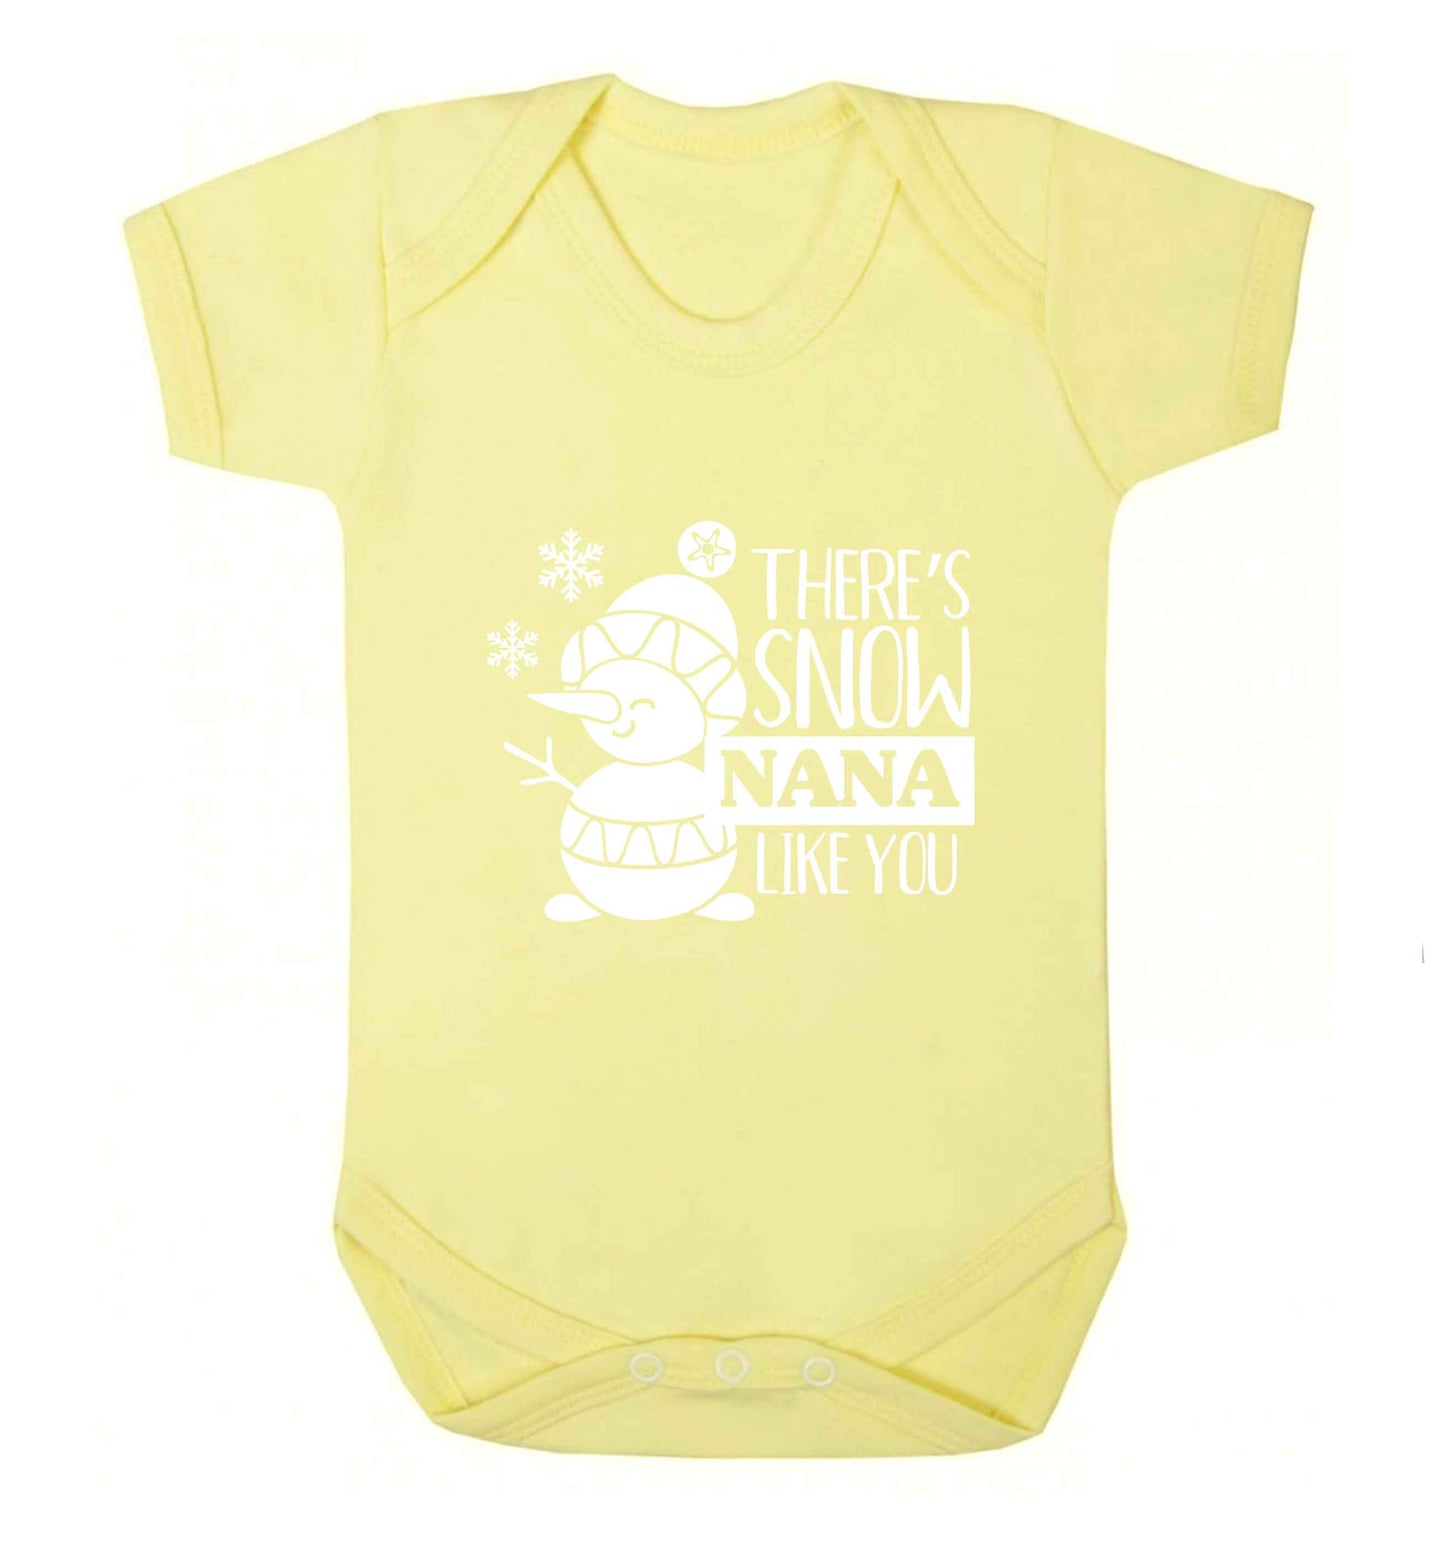 There's snow nana like you baby vest pale yellow 18-24 months